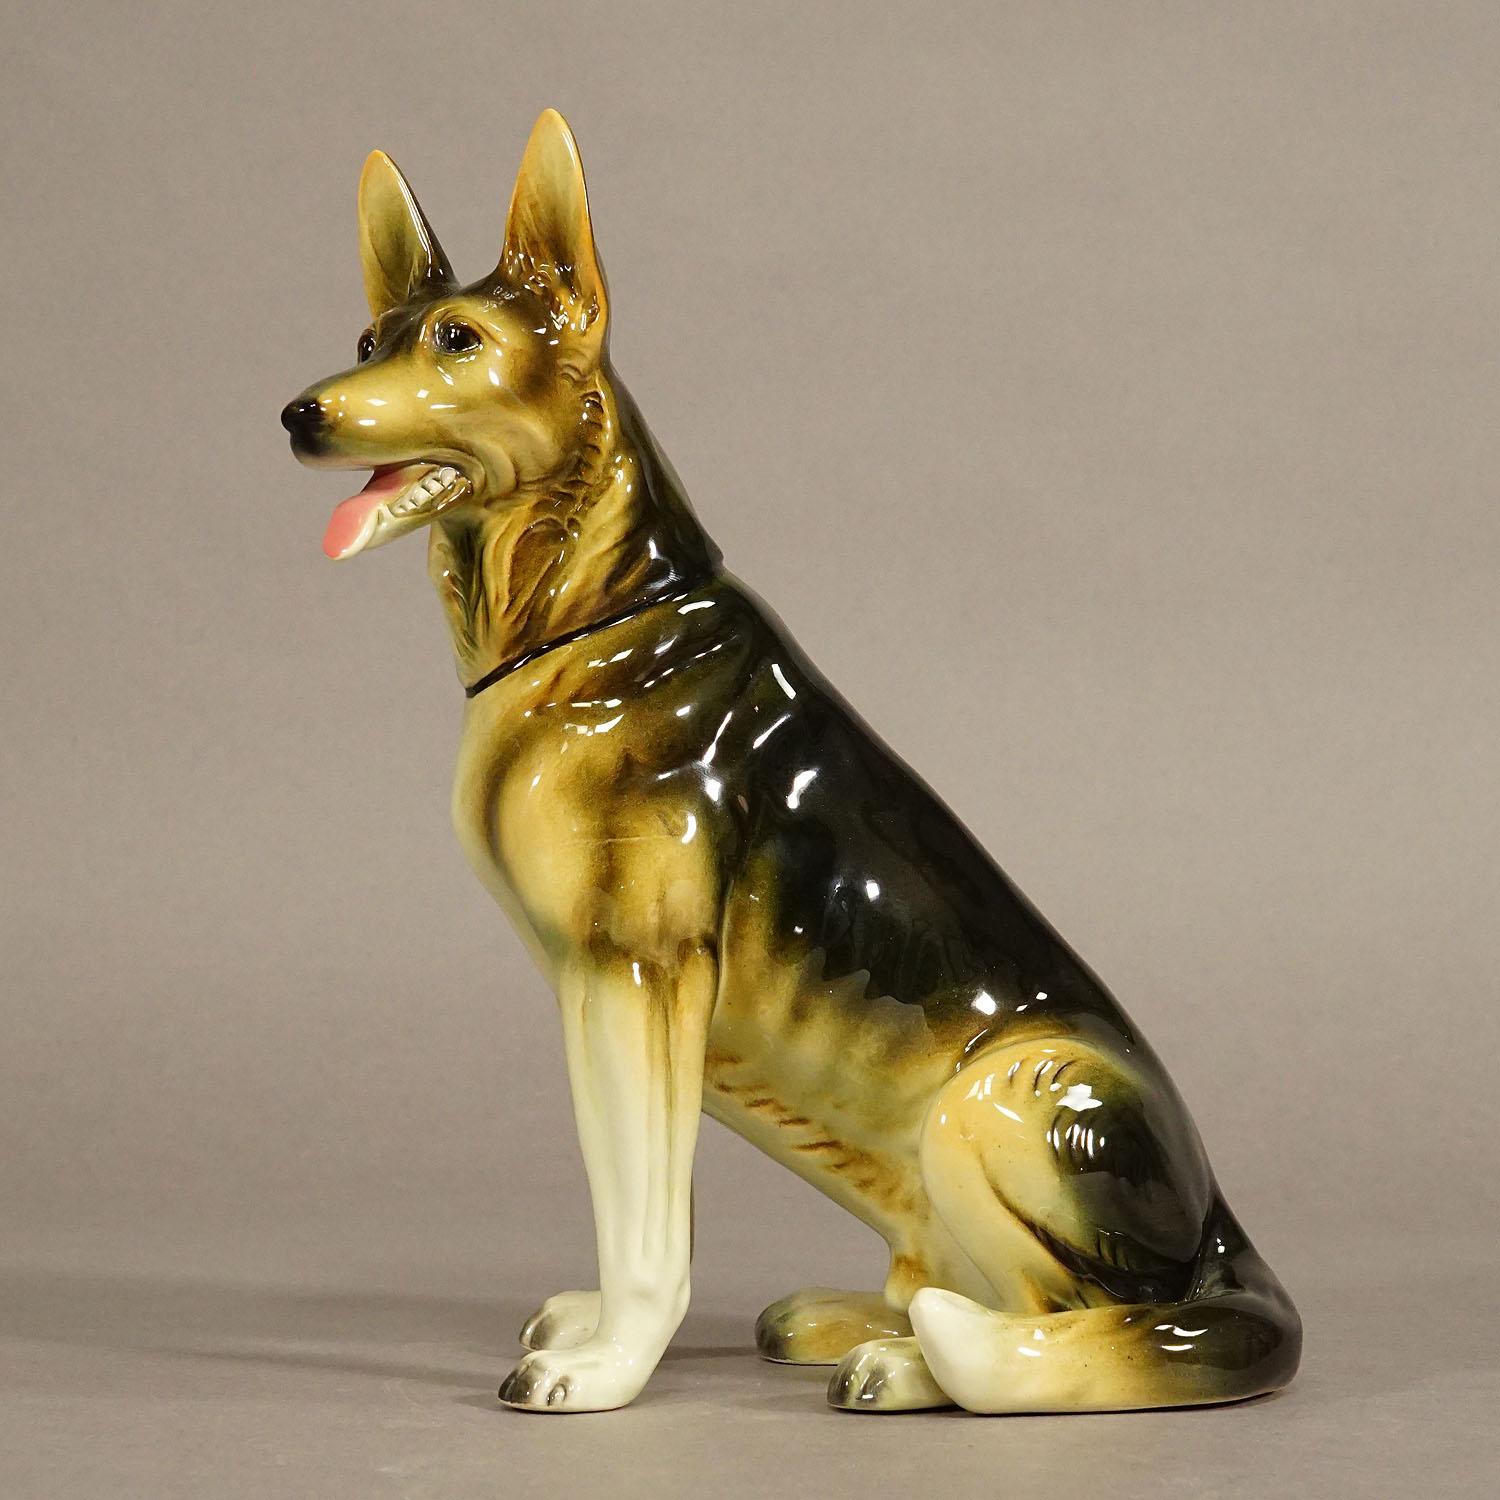 Goeble Porcelain Figurine of a German Shepherd Dog

A vintage hand painted porcelain figurine of a German shepherd dog. Manufactured by Goebel in the late 20th Century. A large vintage vitrine object in excellent condition. The Goeble hallmark is